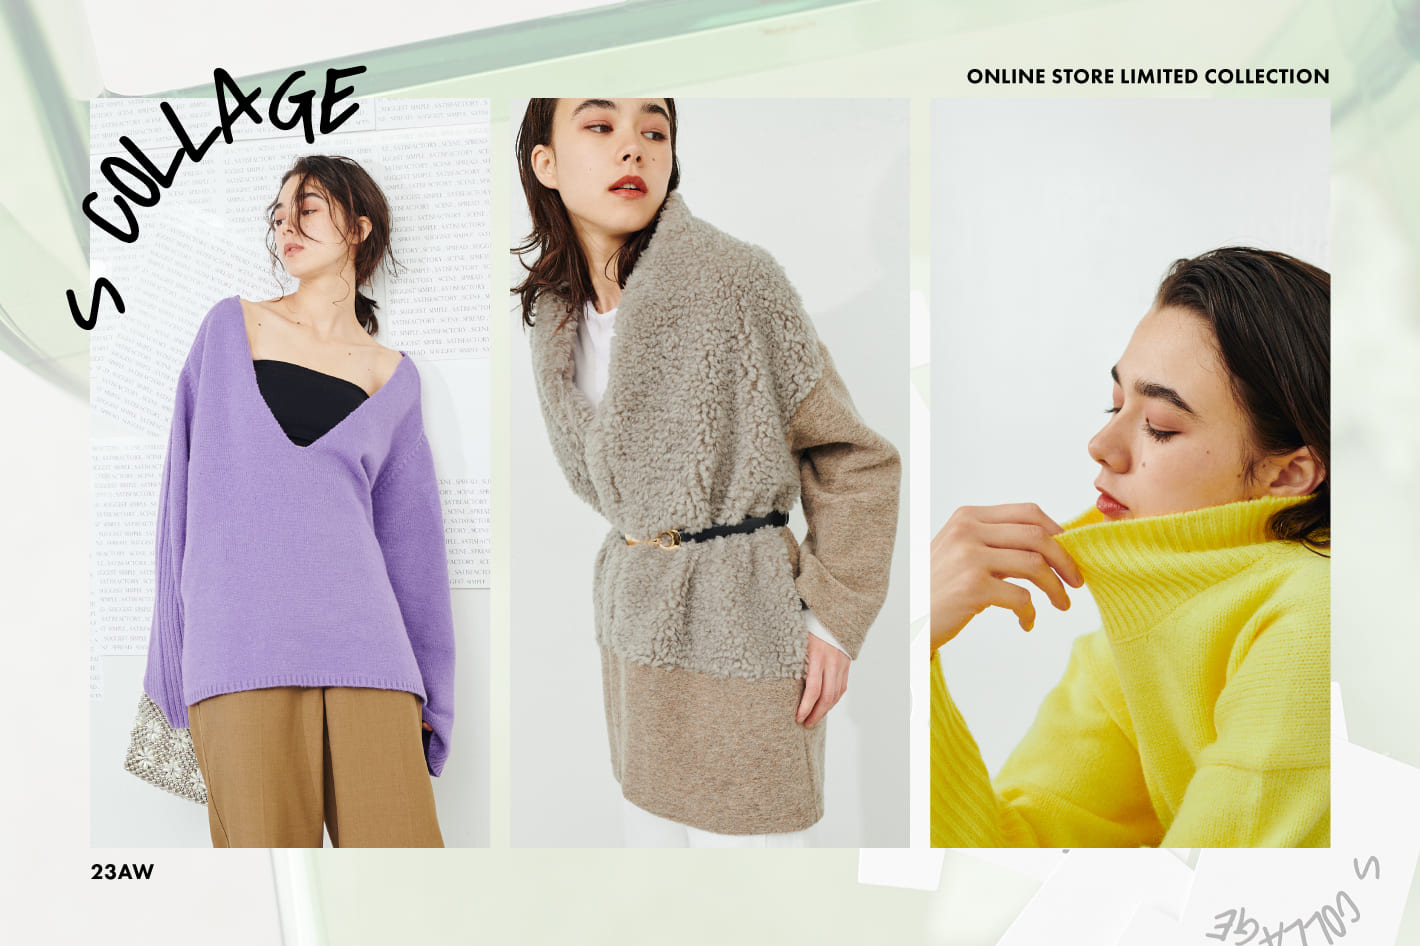 COLLAGE GALLARDAGALANTE 《S COLLAGE》23AW ONLINE STORE LIMITED COLLECTION